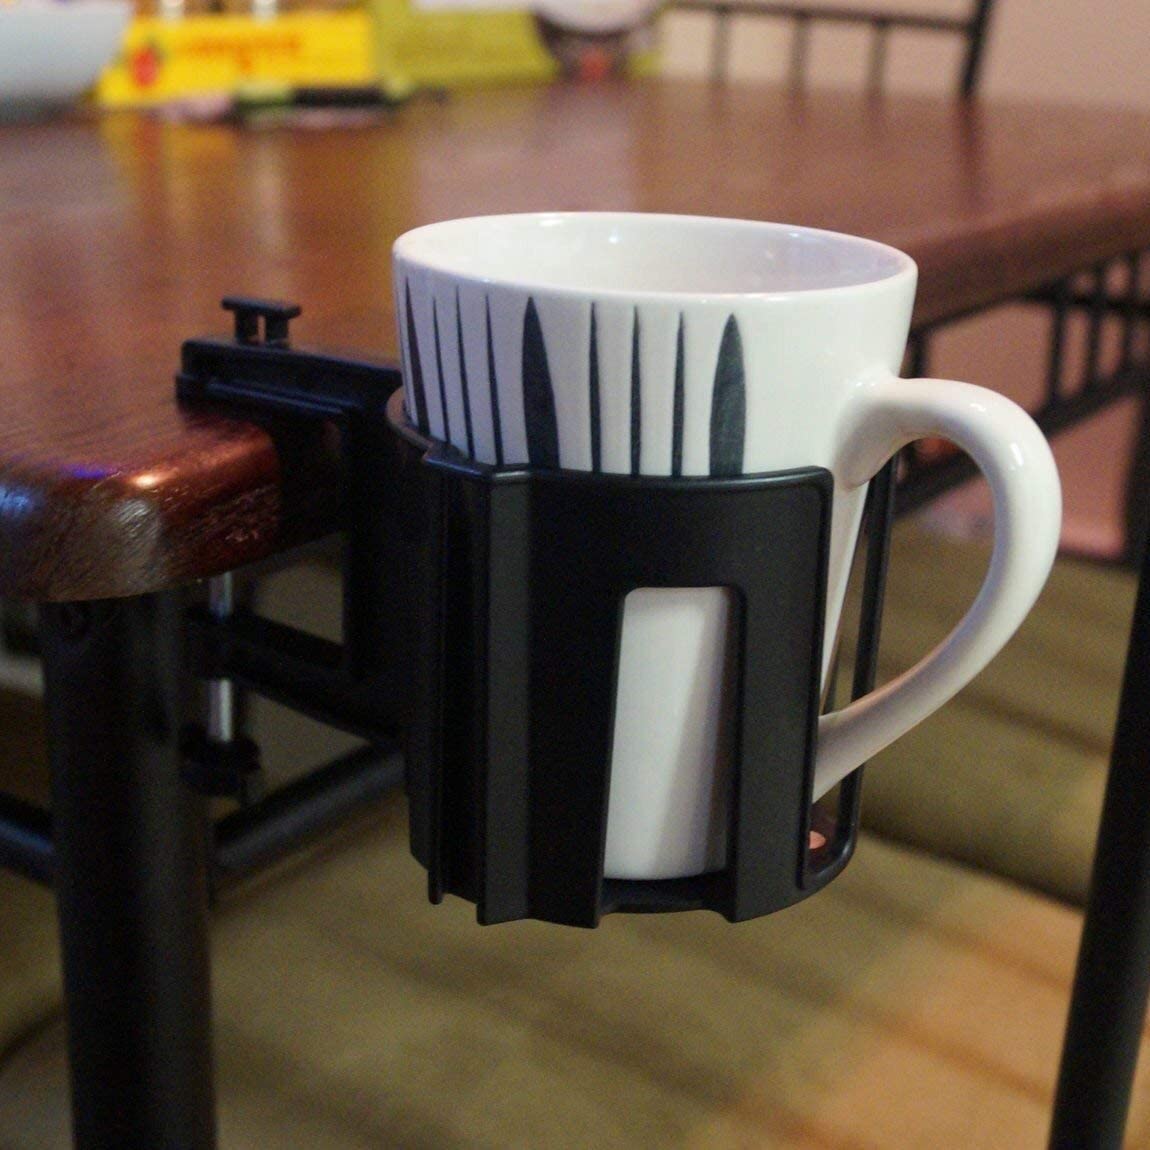 A cup holster attached to a wooden desk. A white mug is inside the holster.